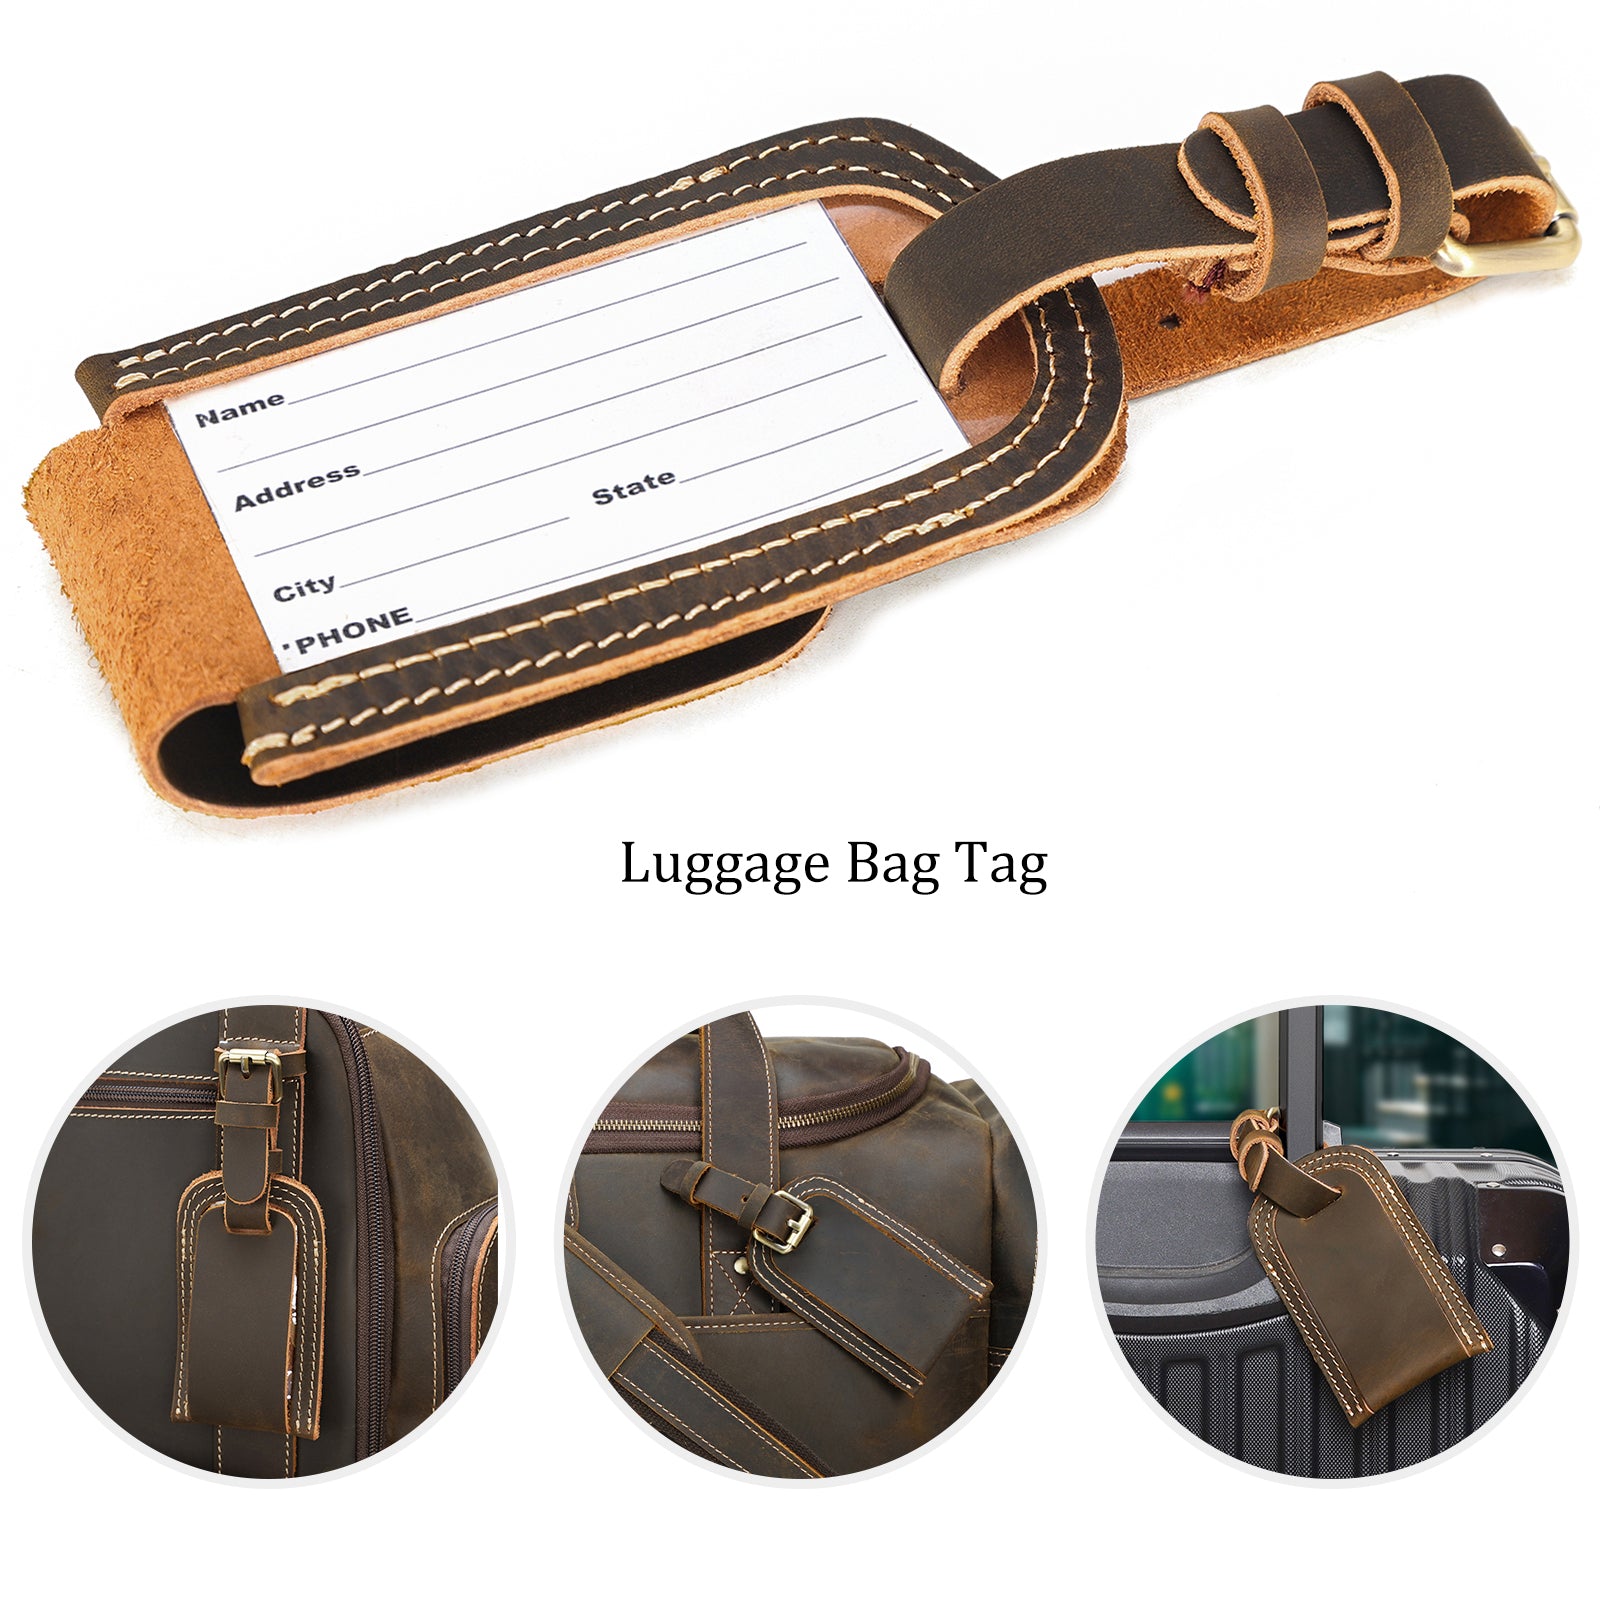 The Luggage Tag - Collagerie